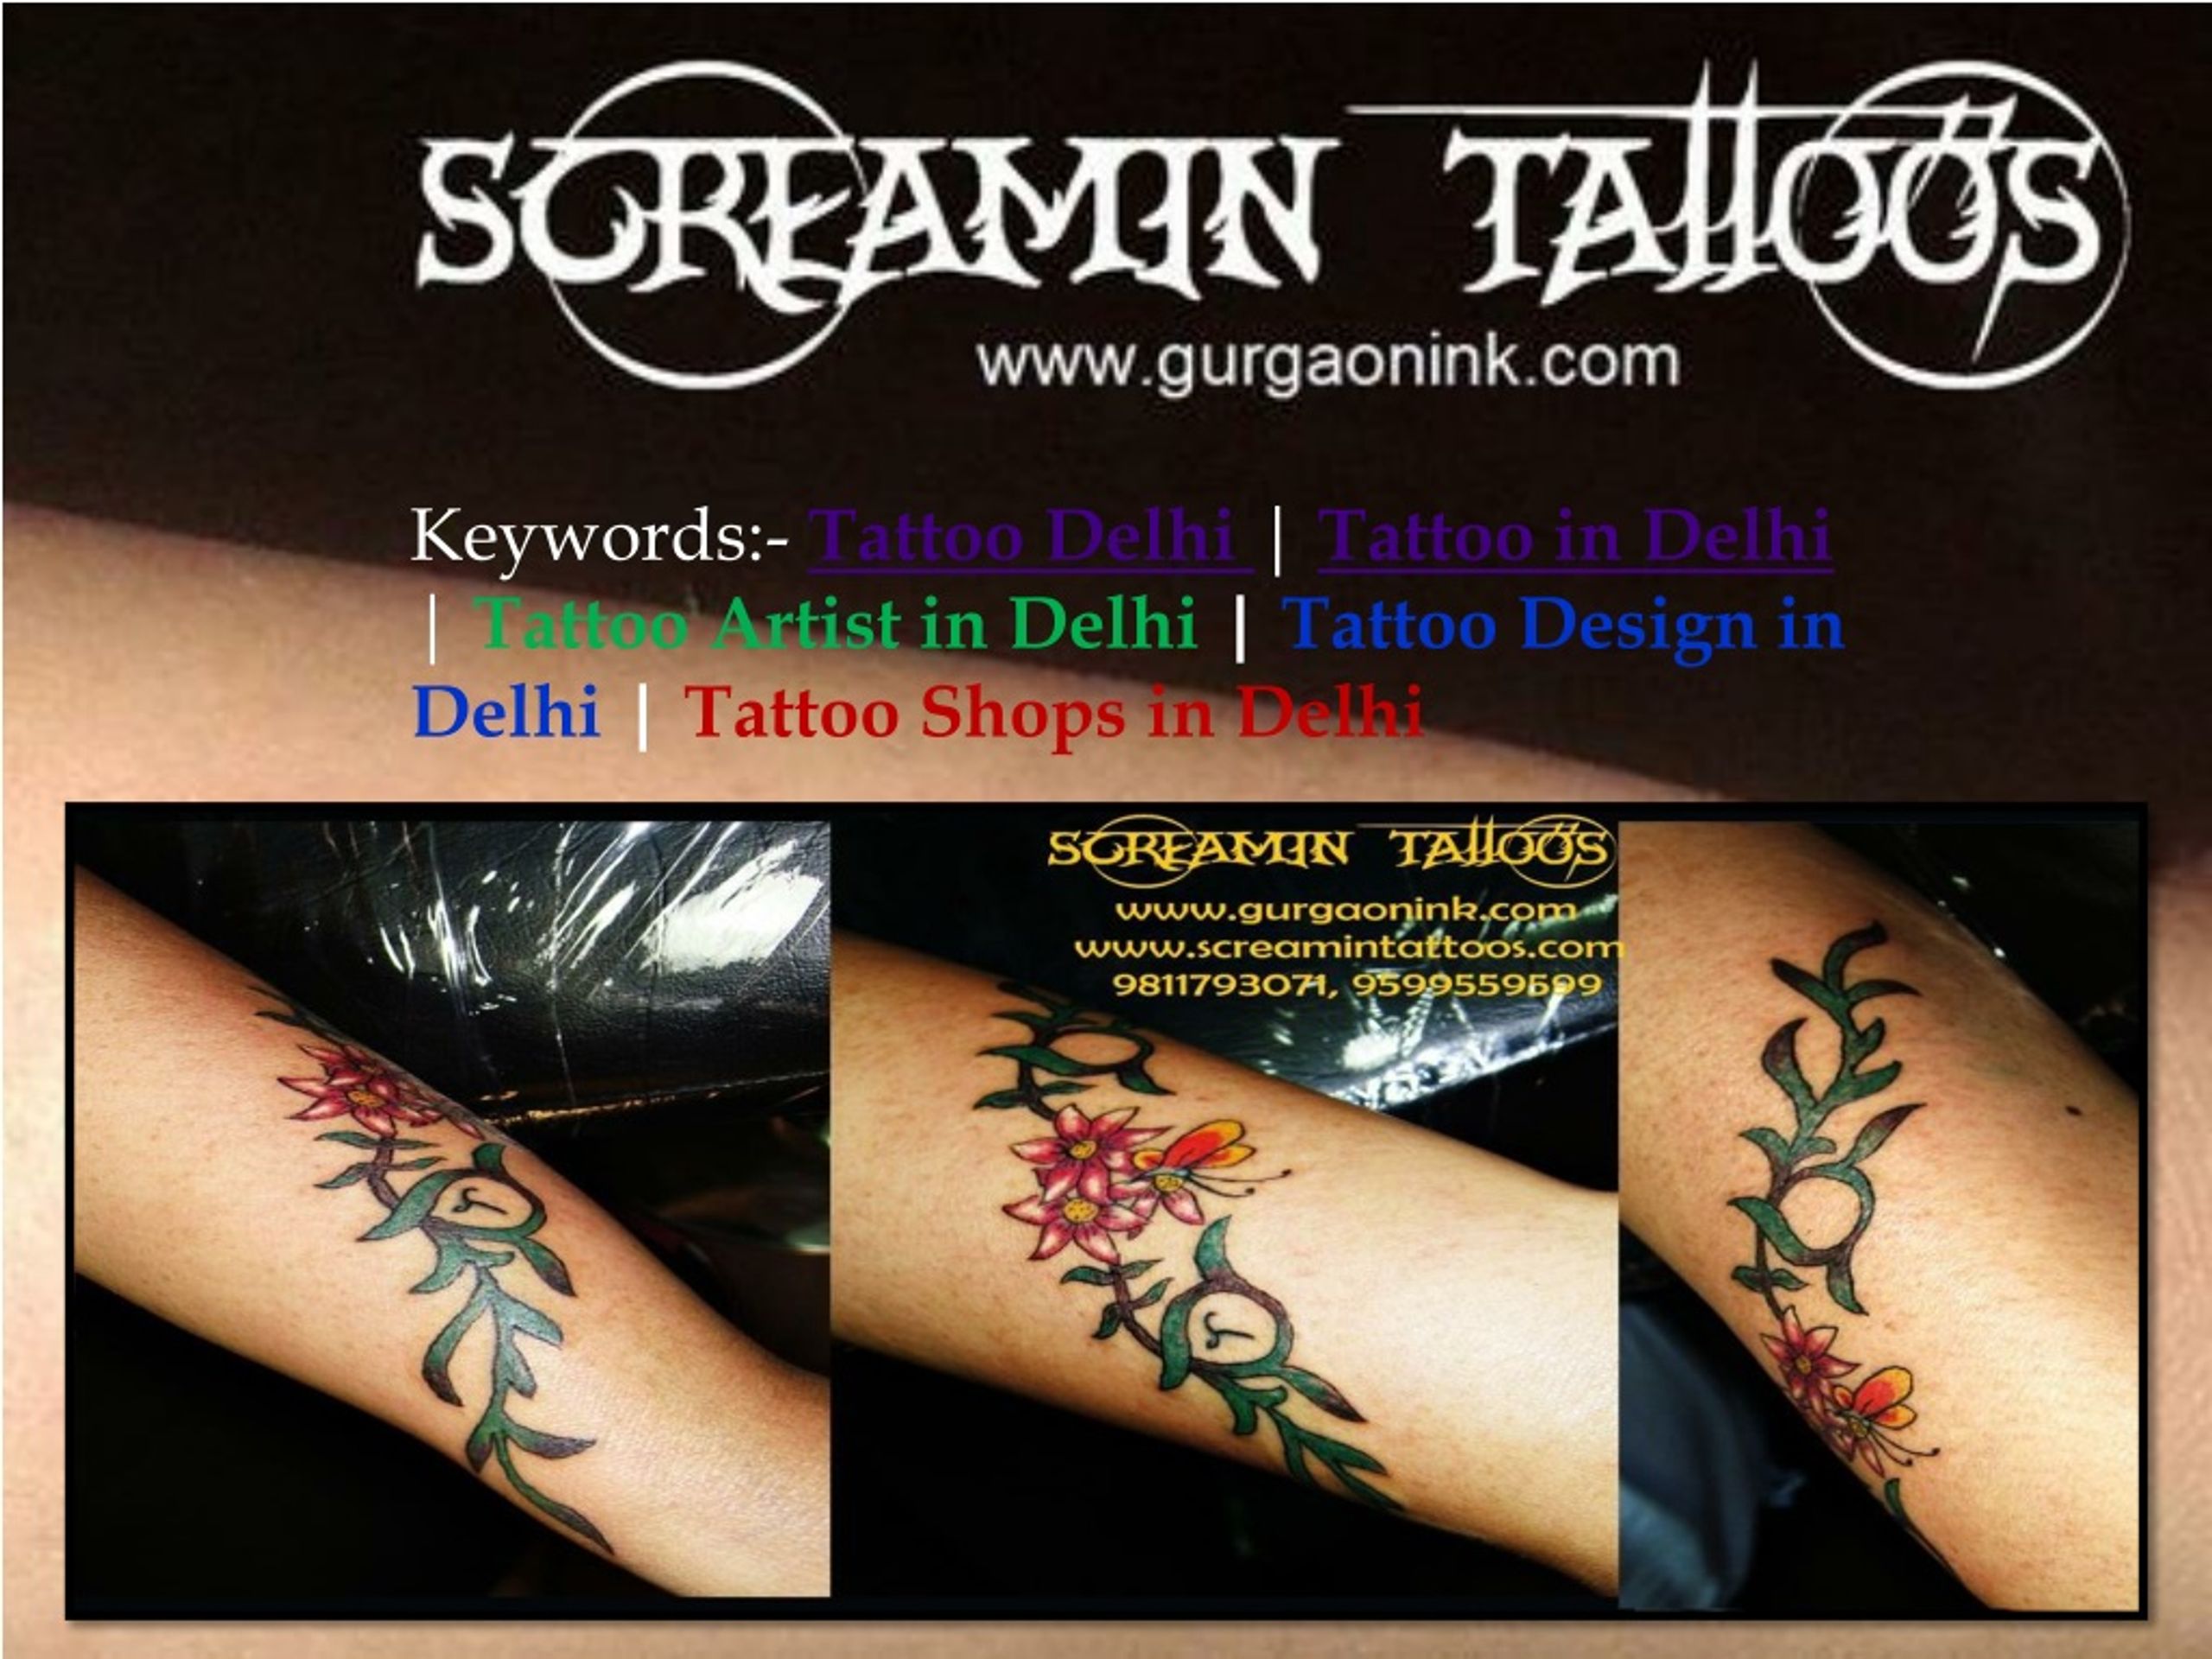 Naksh Tattoos - Tattoo in Hyderabad at Naksh Tattoos: Our Tattoo Studio is  sanitized and Musk and Gloves are must to wear. https://nakshtattoos.com/ # tattoo #tattoos #ink #inked #art #tattooartist #tattooed #tattooart  #tattoolife #